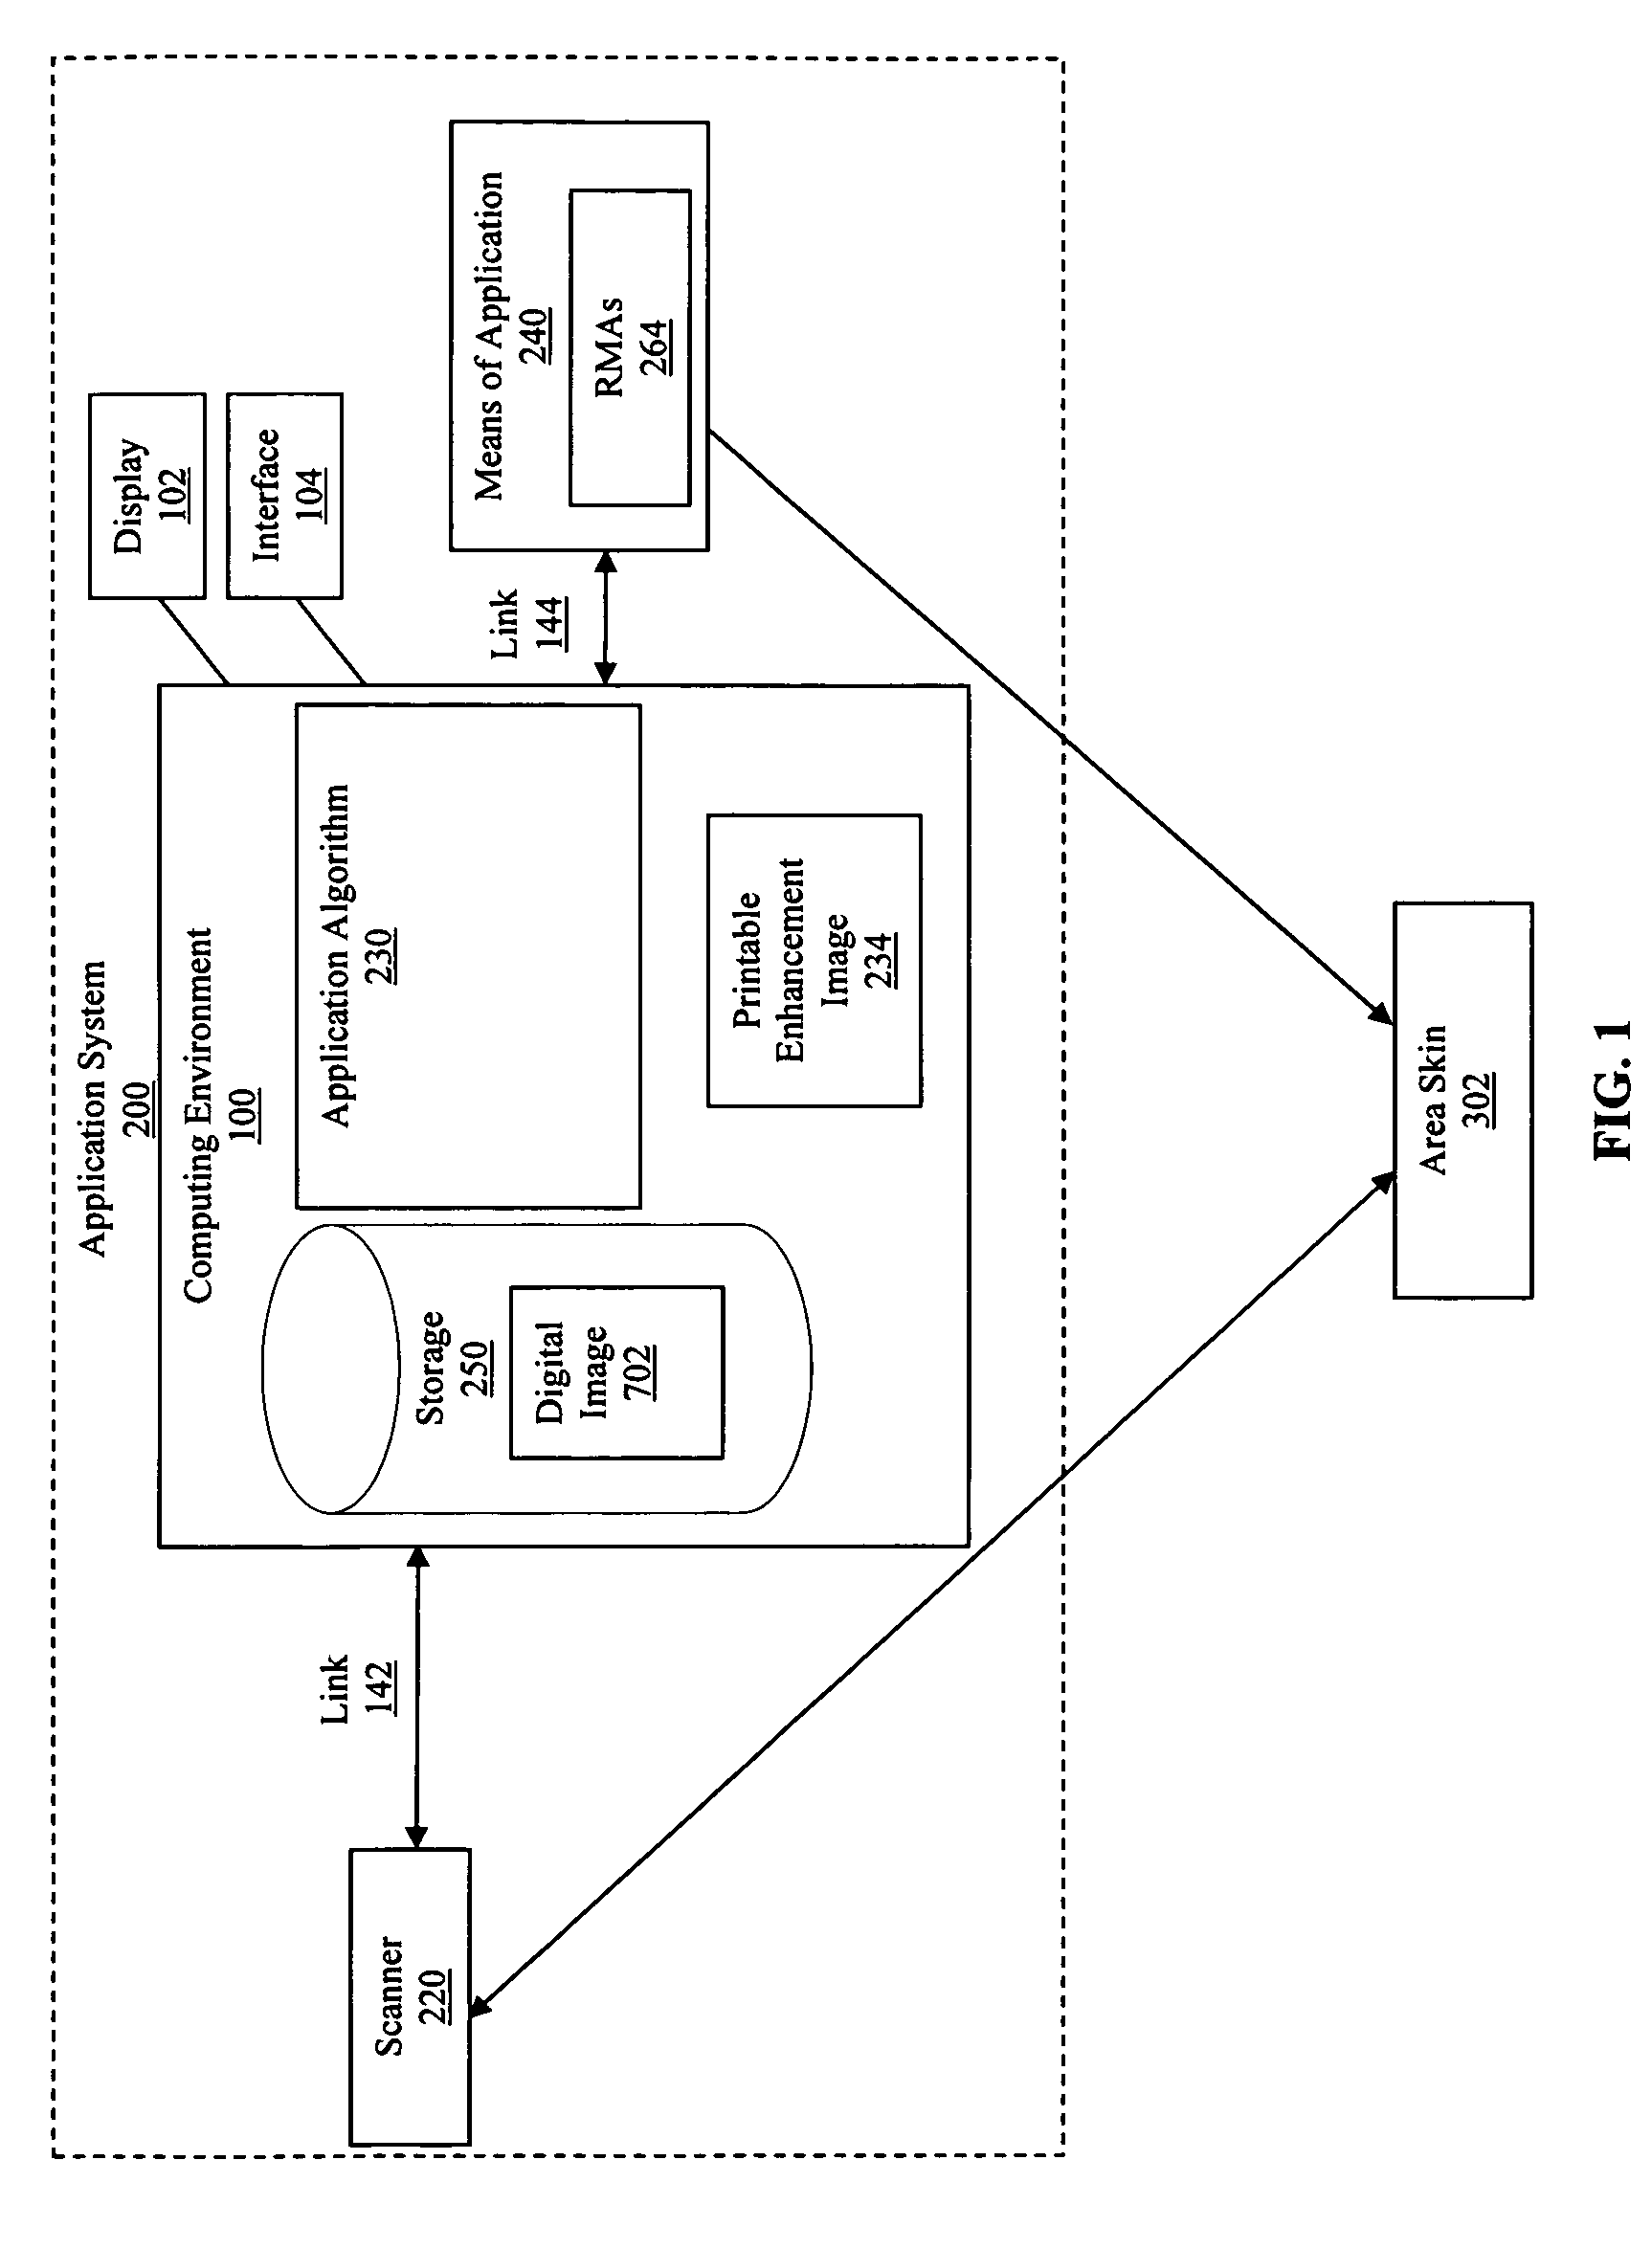 System and method for applying a reflectance modifying agent to change a person's appearance based on a digital image